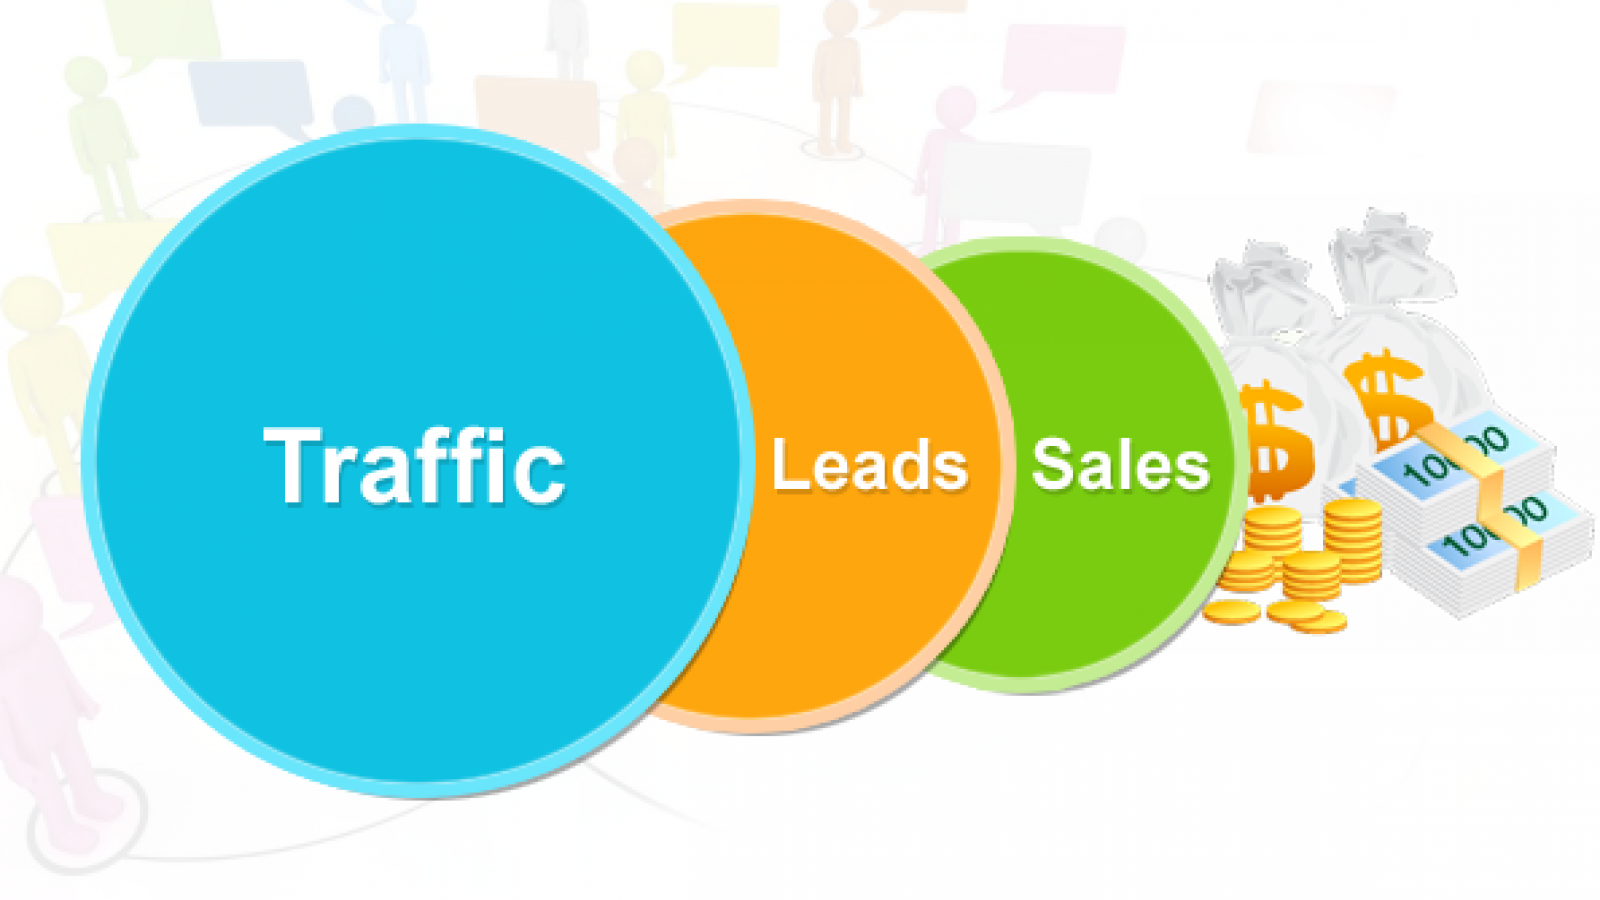 Converting Your Traffic into Sales